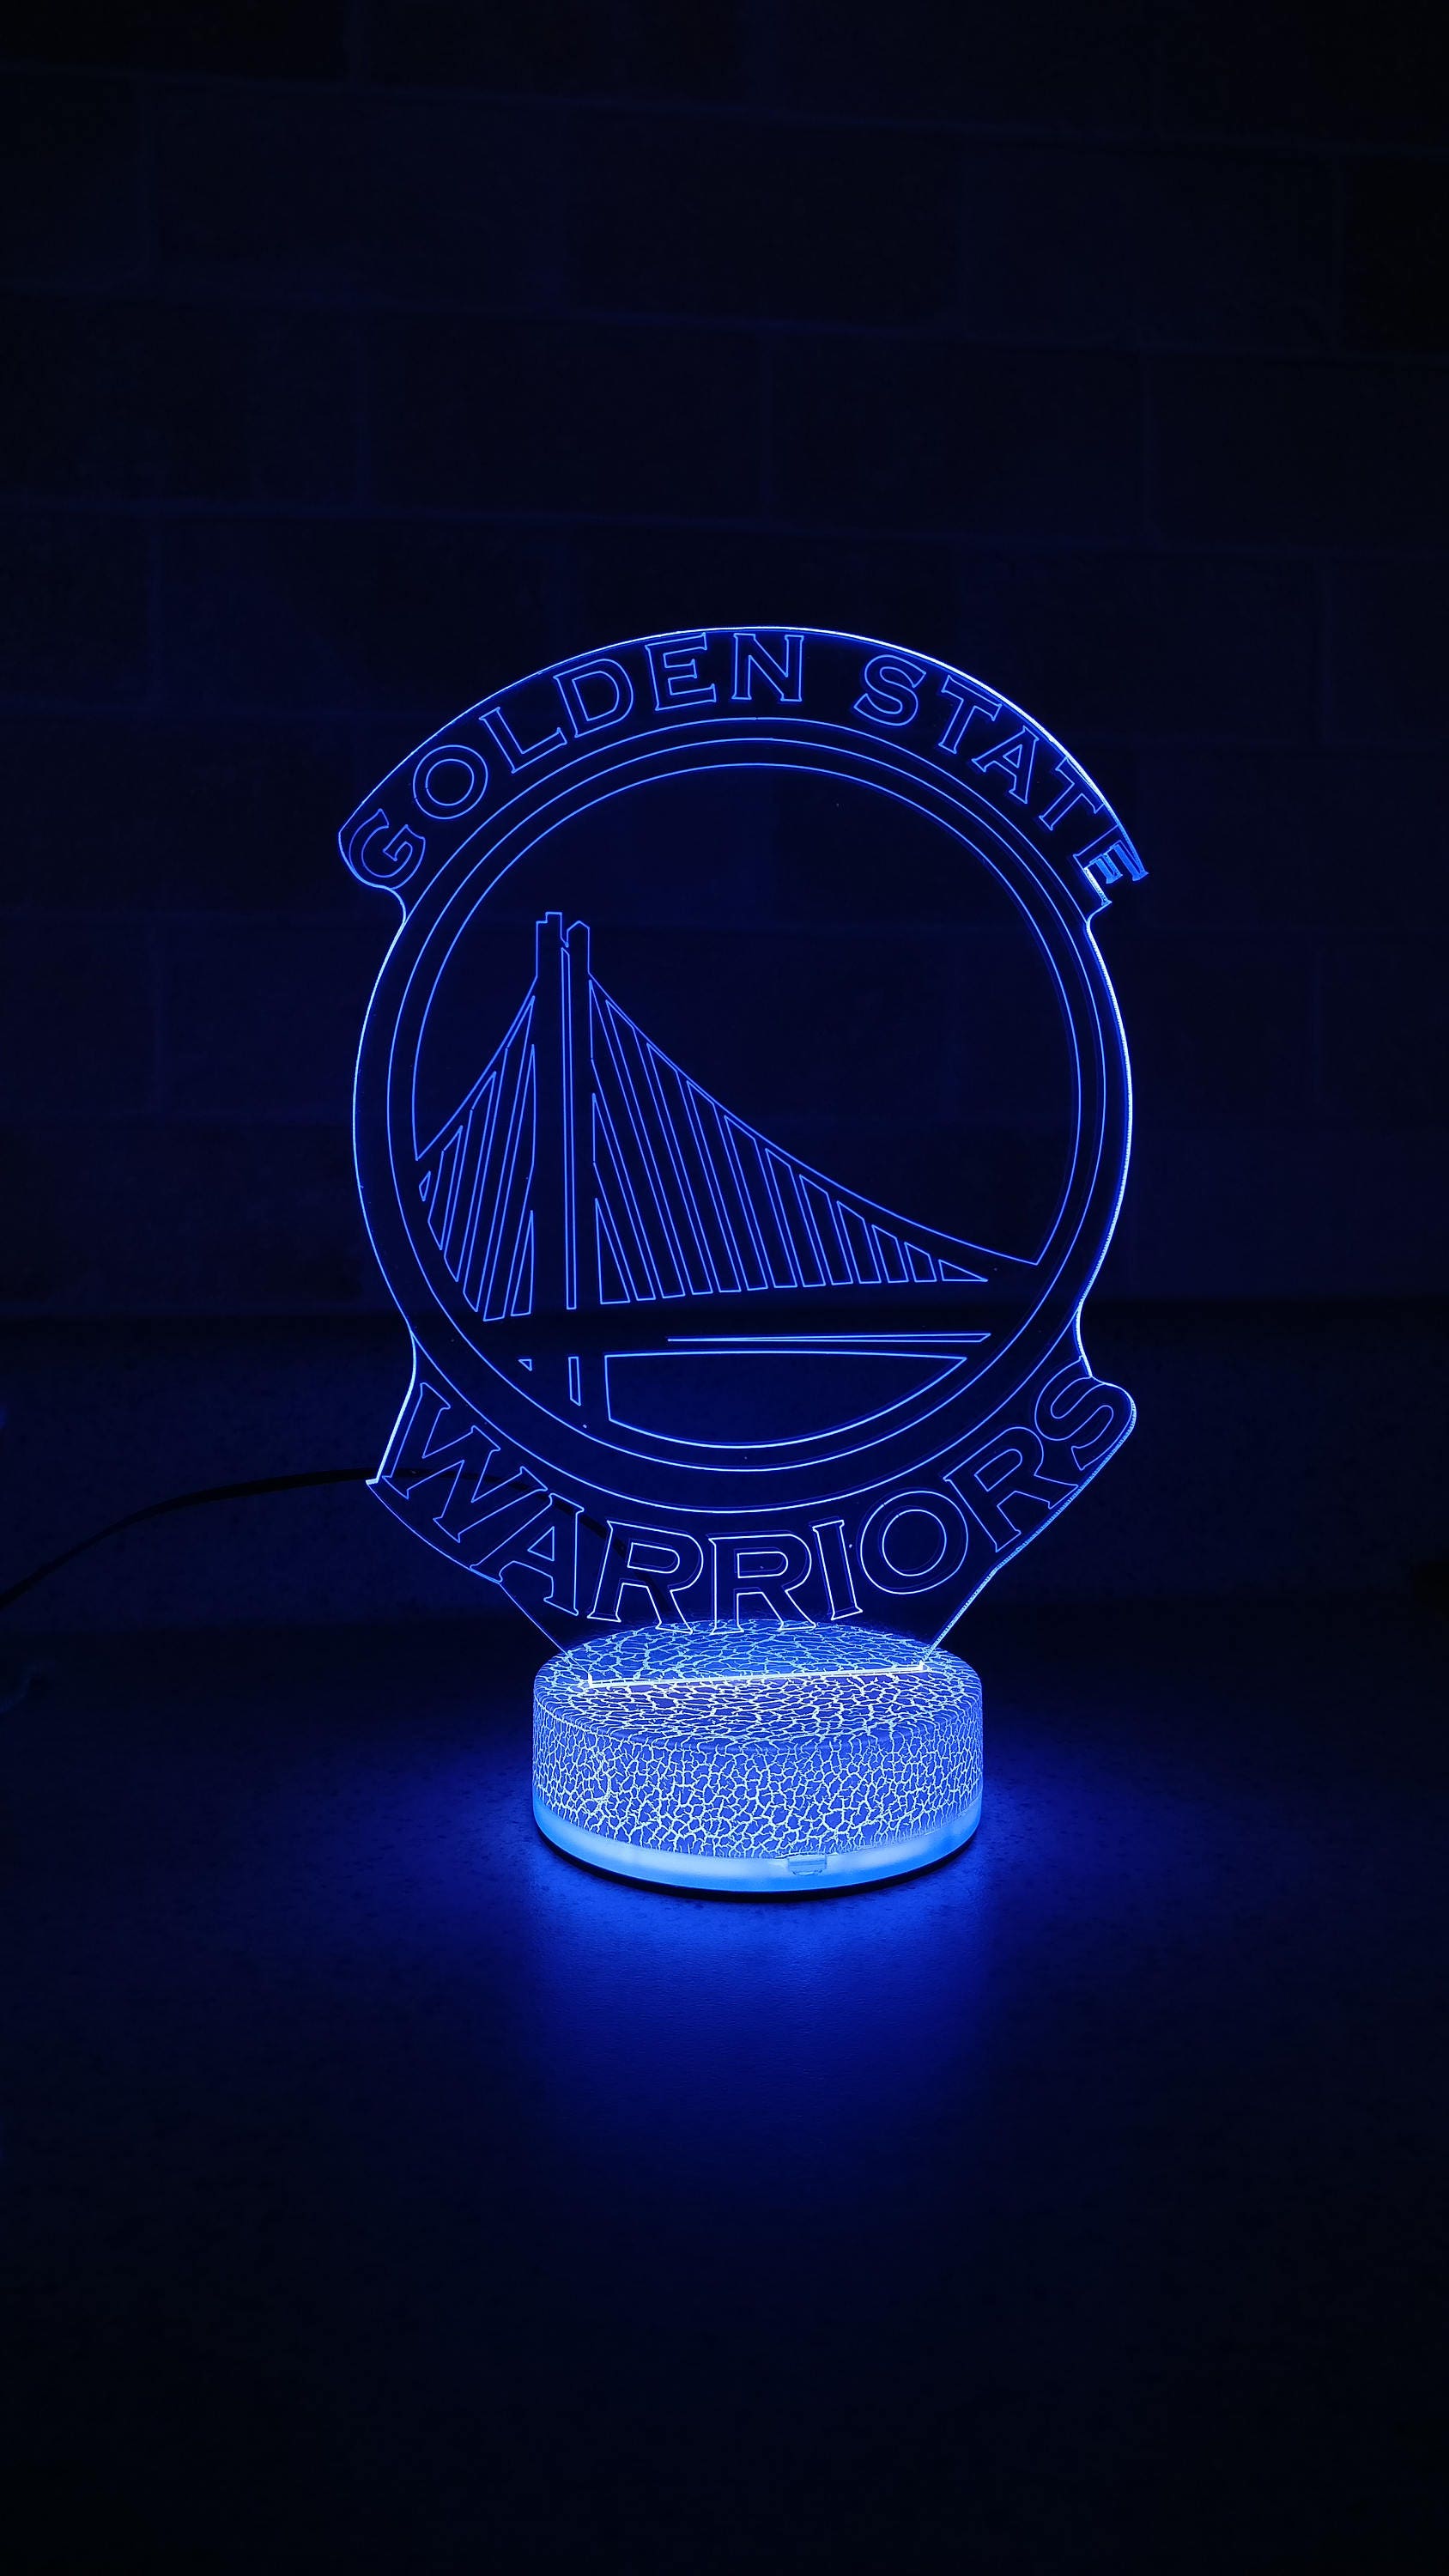 Golden State Warriors Team LED Light 3D Optical Illusion Smart 8 Colors Night Light Table Lamp Art Sculpture Lights Bedroom Decor Lights with USB Power Cable 